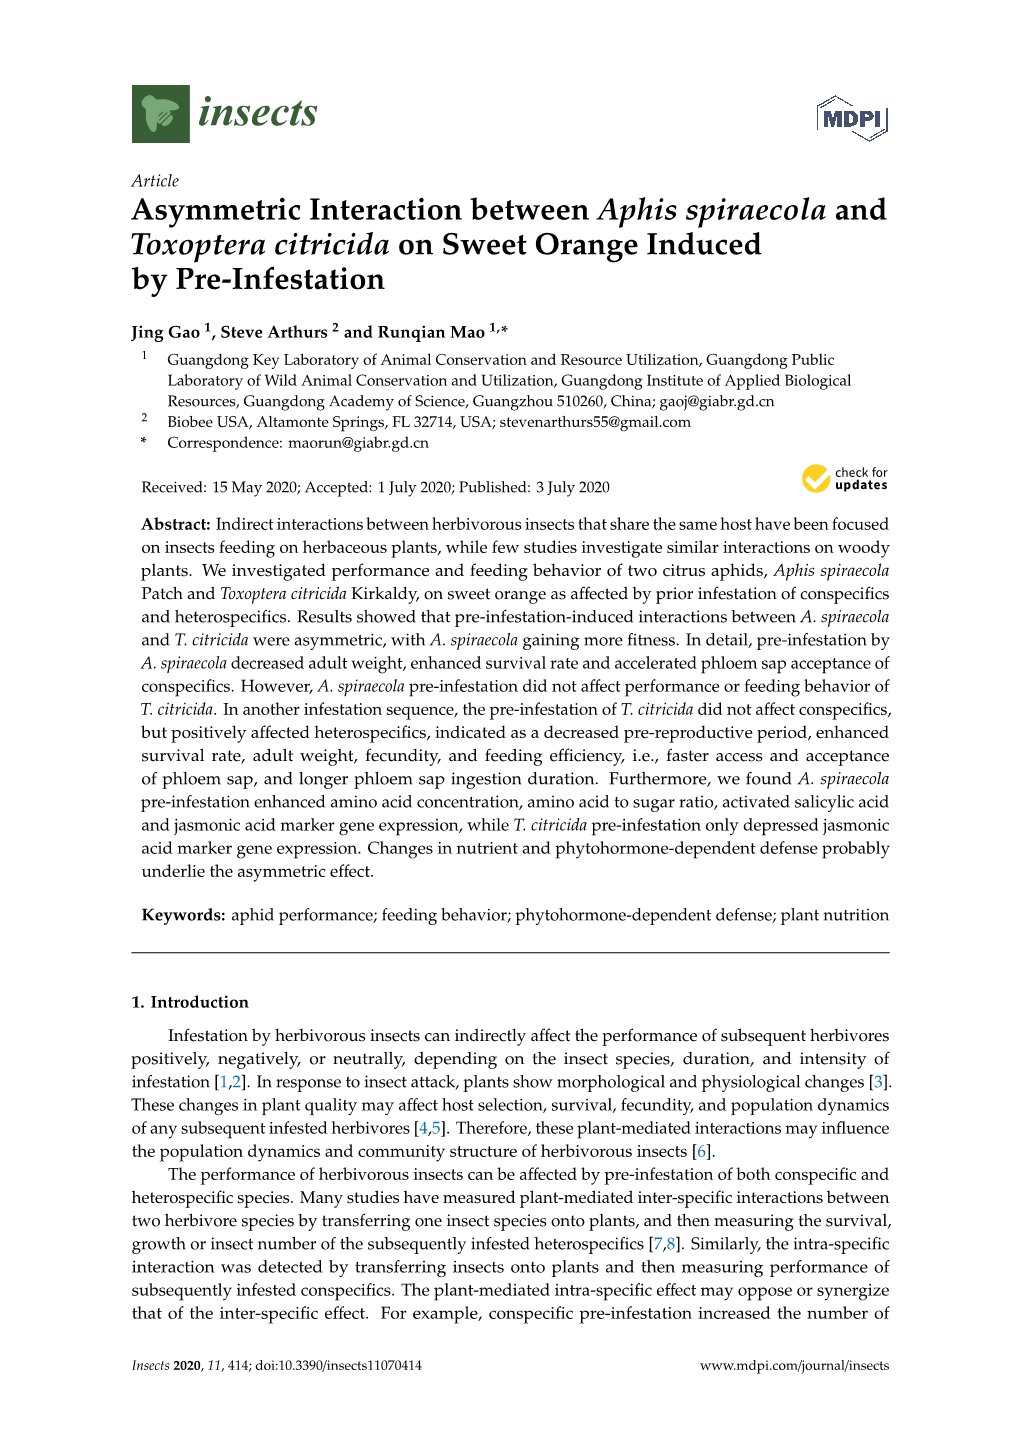 Asymmetric Interaction Between Aphis Spiraecola and Toxoptera Citricida on Sweet Orange Induced by Pre-Infestation